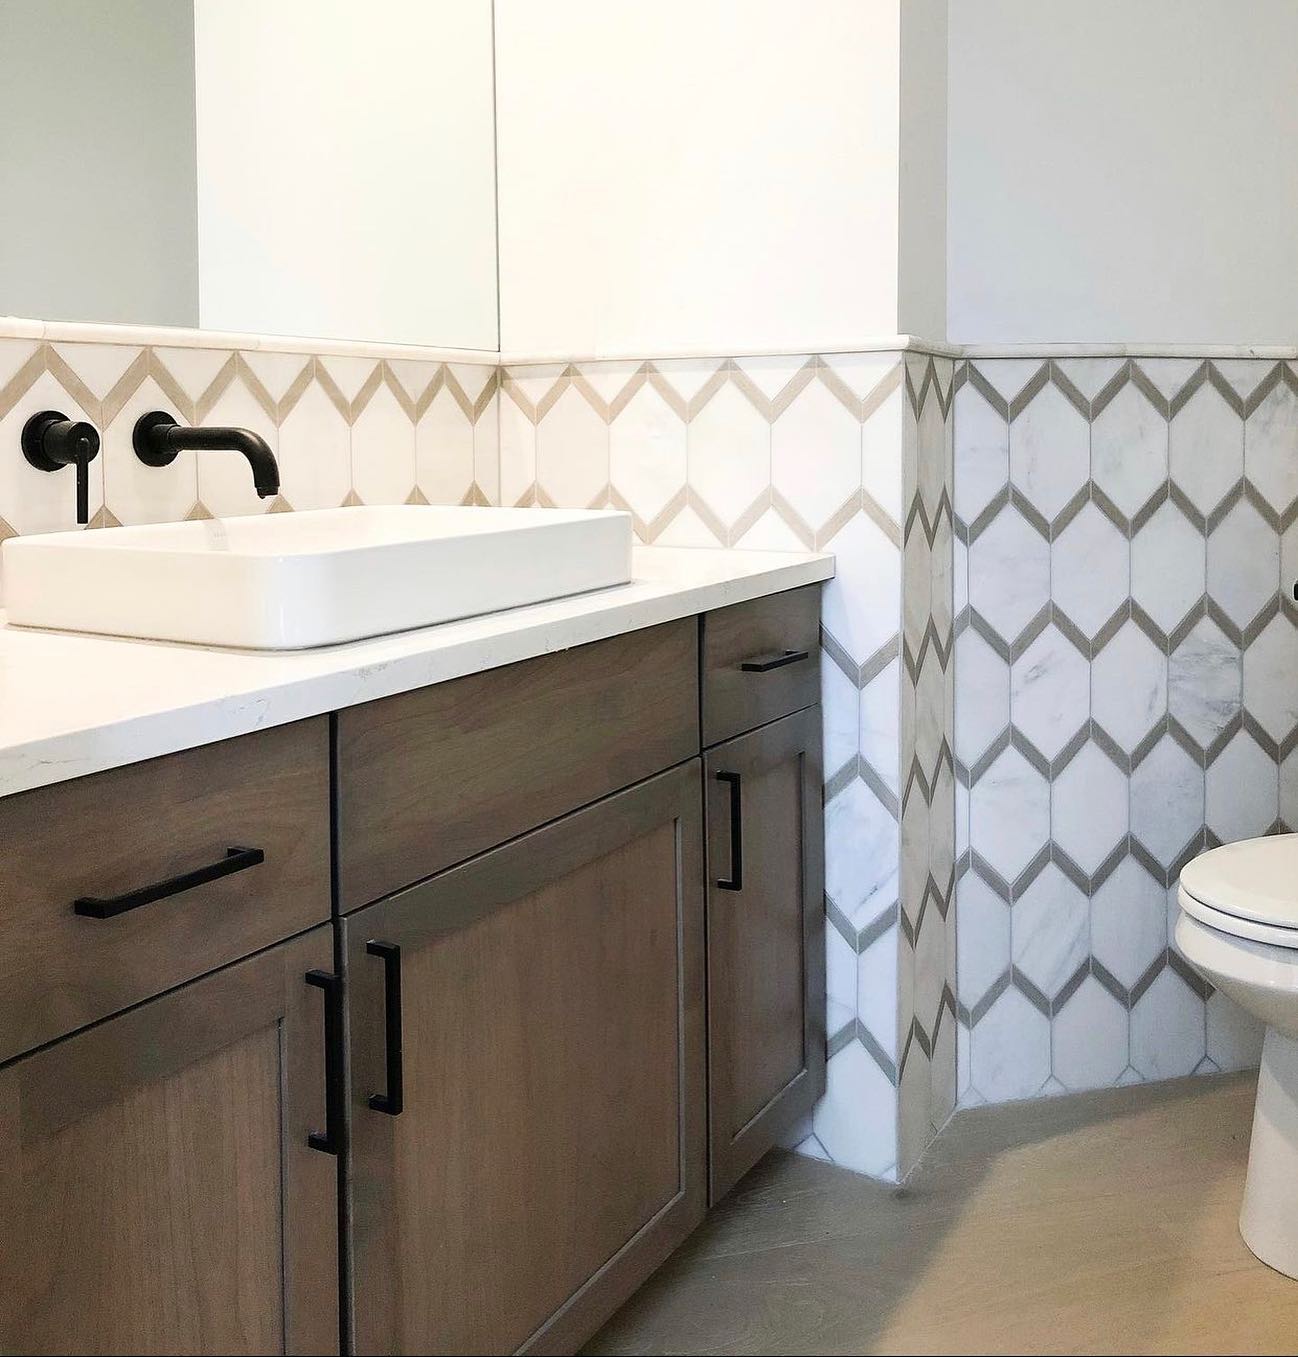 Make a statement with neutral tones. 🤩 Our Intrigue collection does just that in a design forward chevron pattern. Via @macadamfd #emsertile